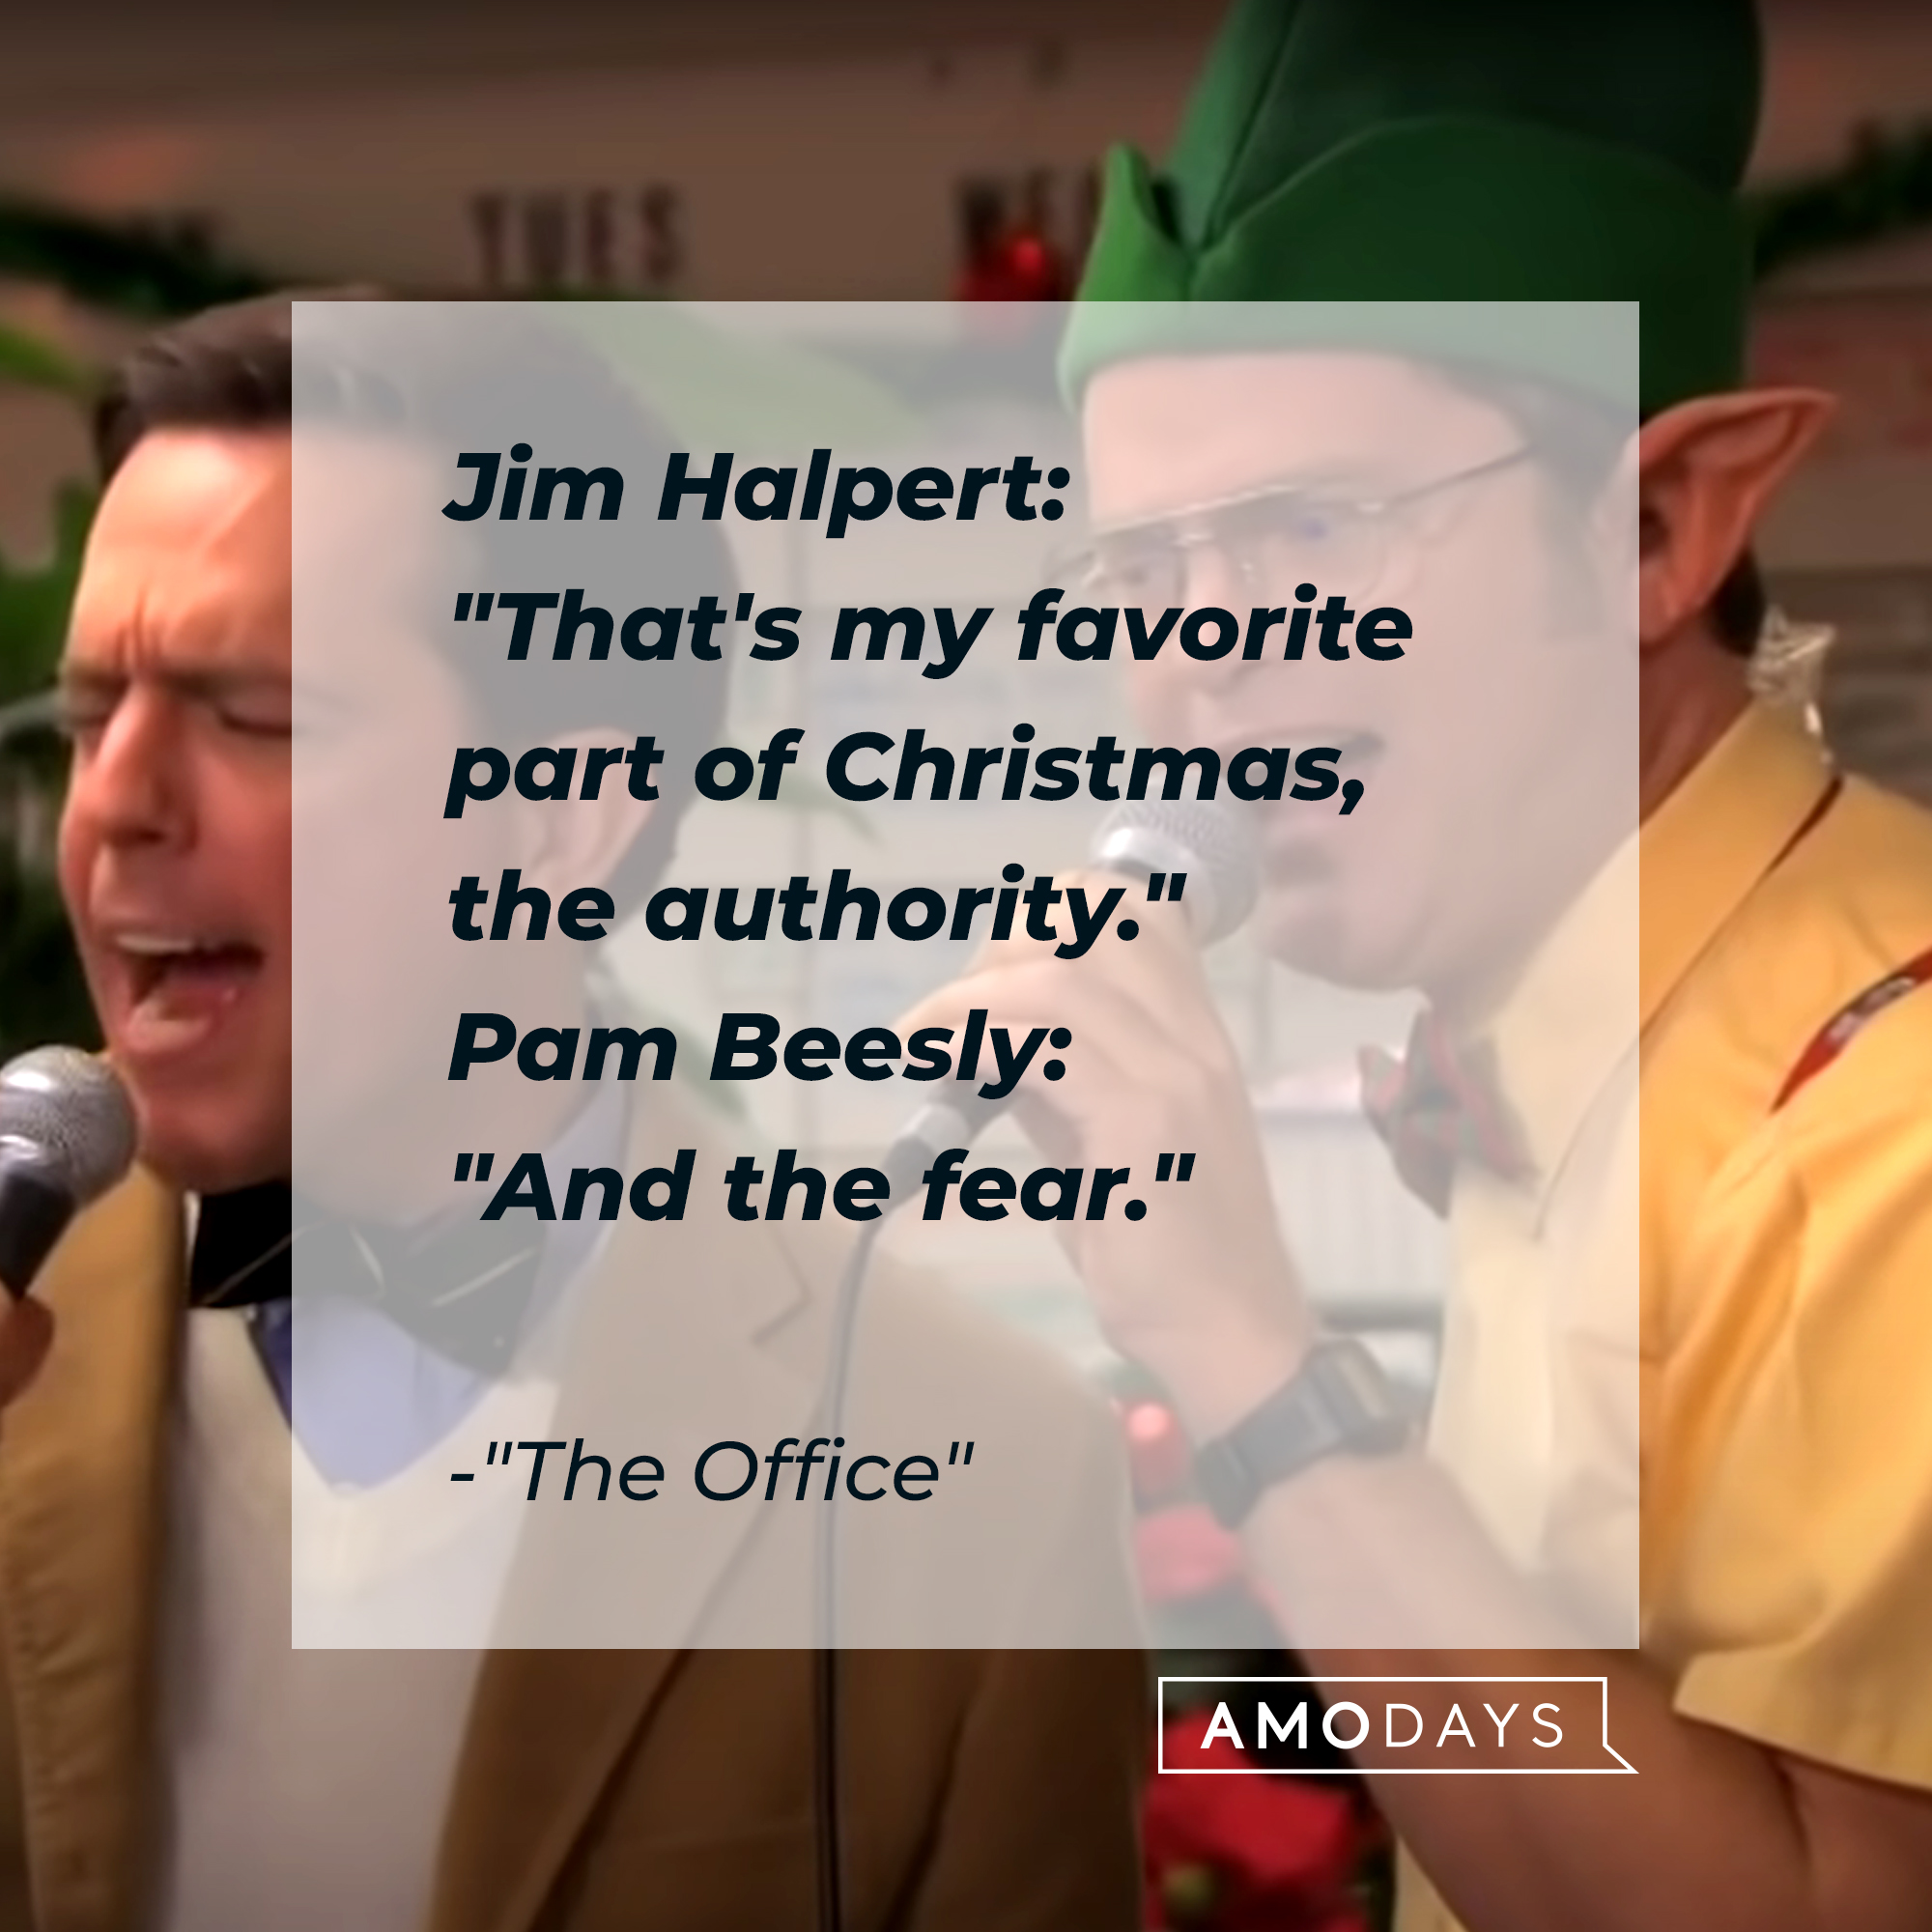 "The Office" quote: Jim Halpert: "That's my favorite part of Christmas, the authority." Pam Beesly: "And the fear." | Source: Youtube/TheOffice